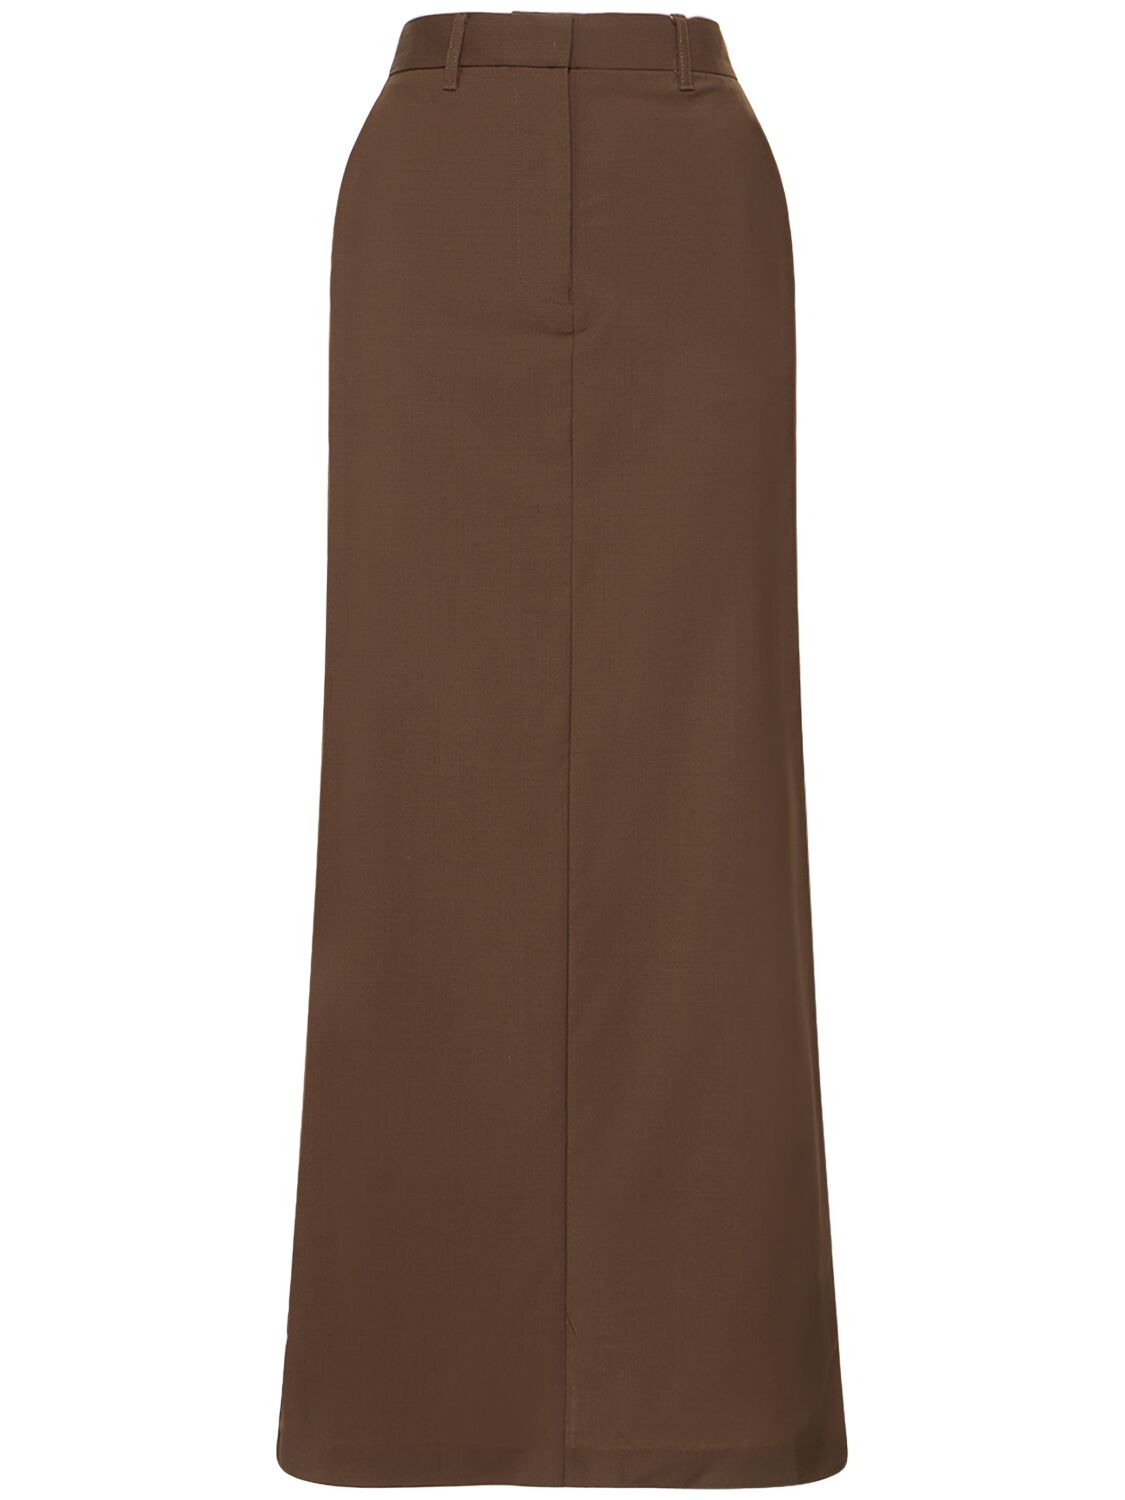 Relaxed Fit Tailored Wool Bln Maxi Skirt – WOMEN > CLOTHING > SKIRTS